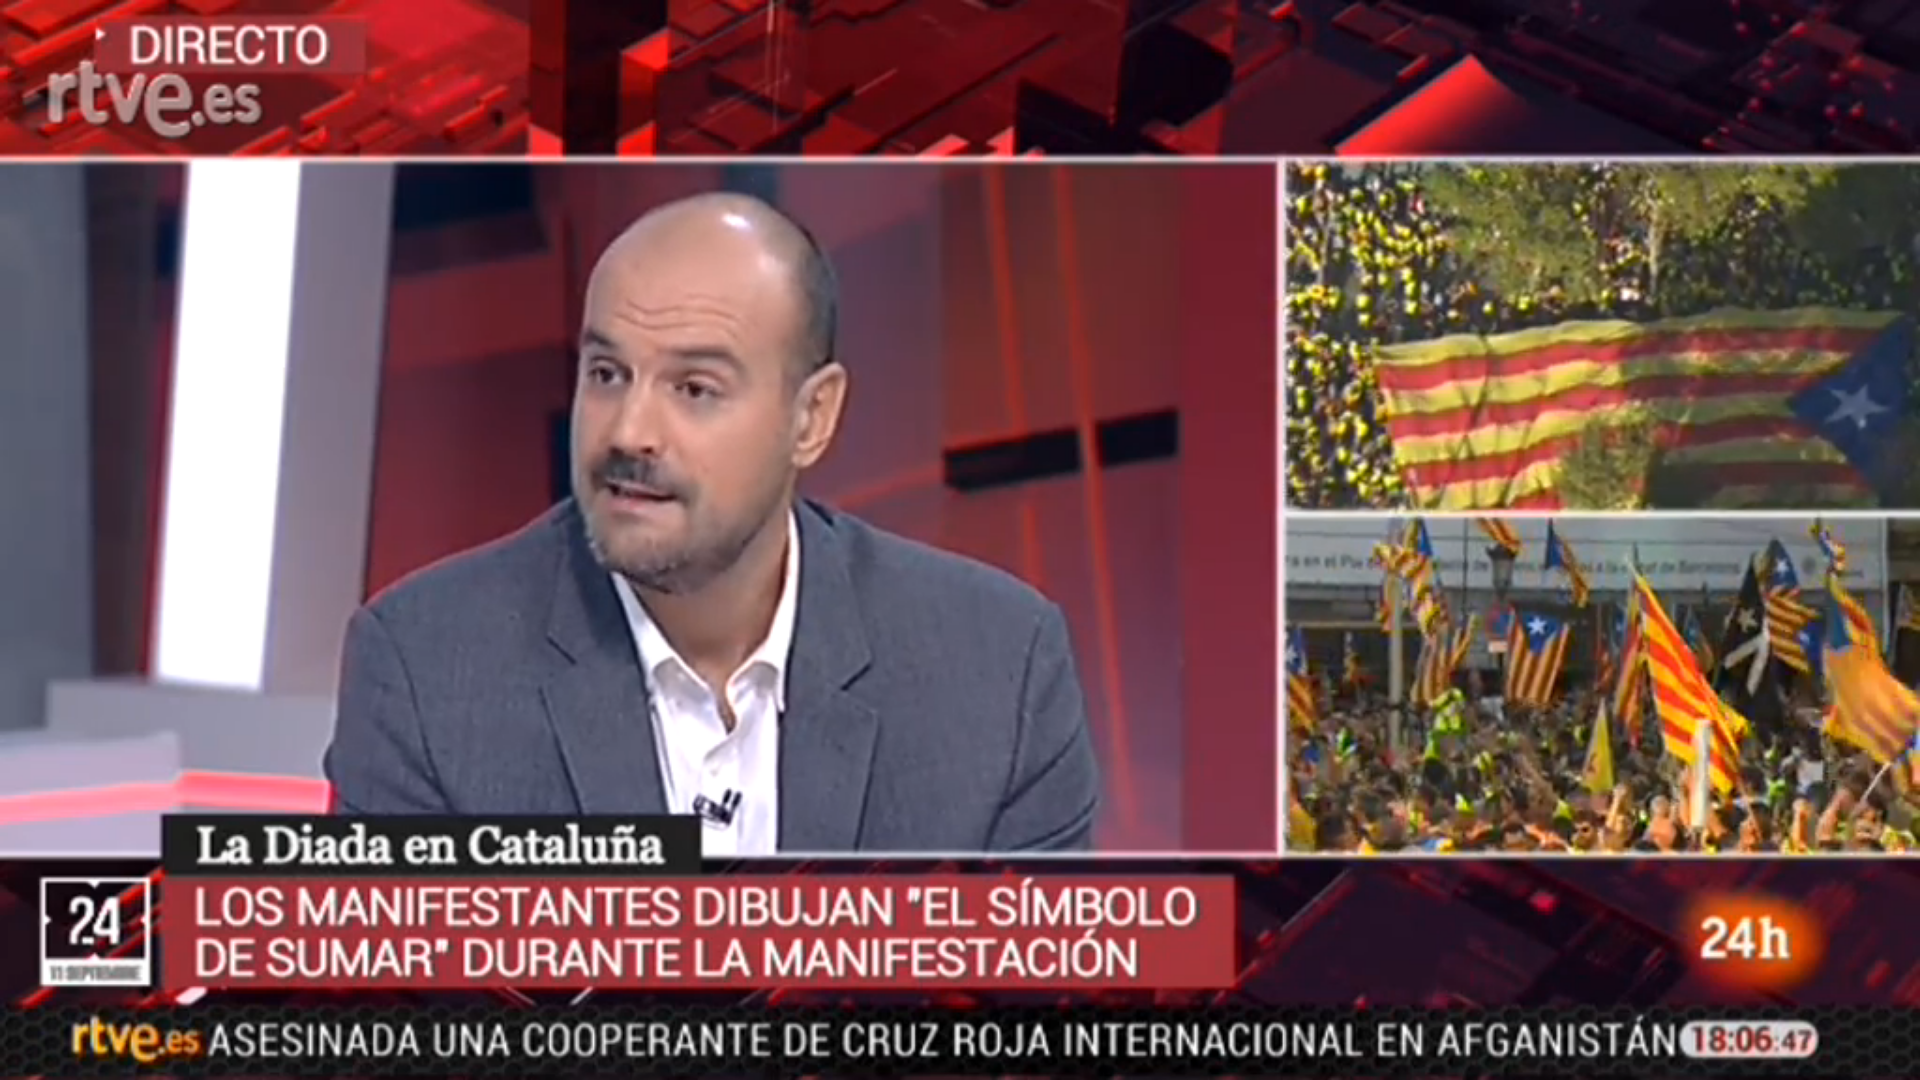 Spanish public broadcaster creates parallel reality to Catalan National Day